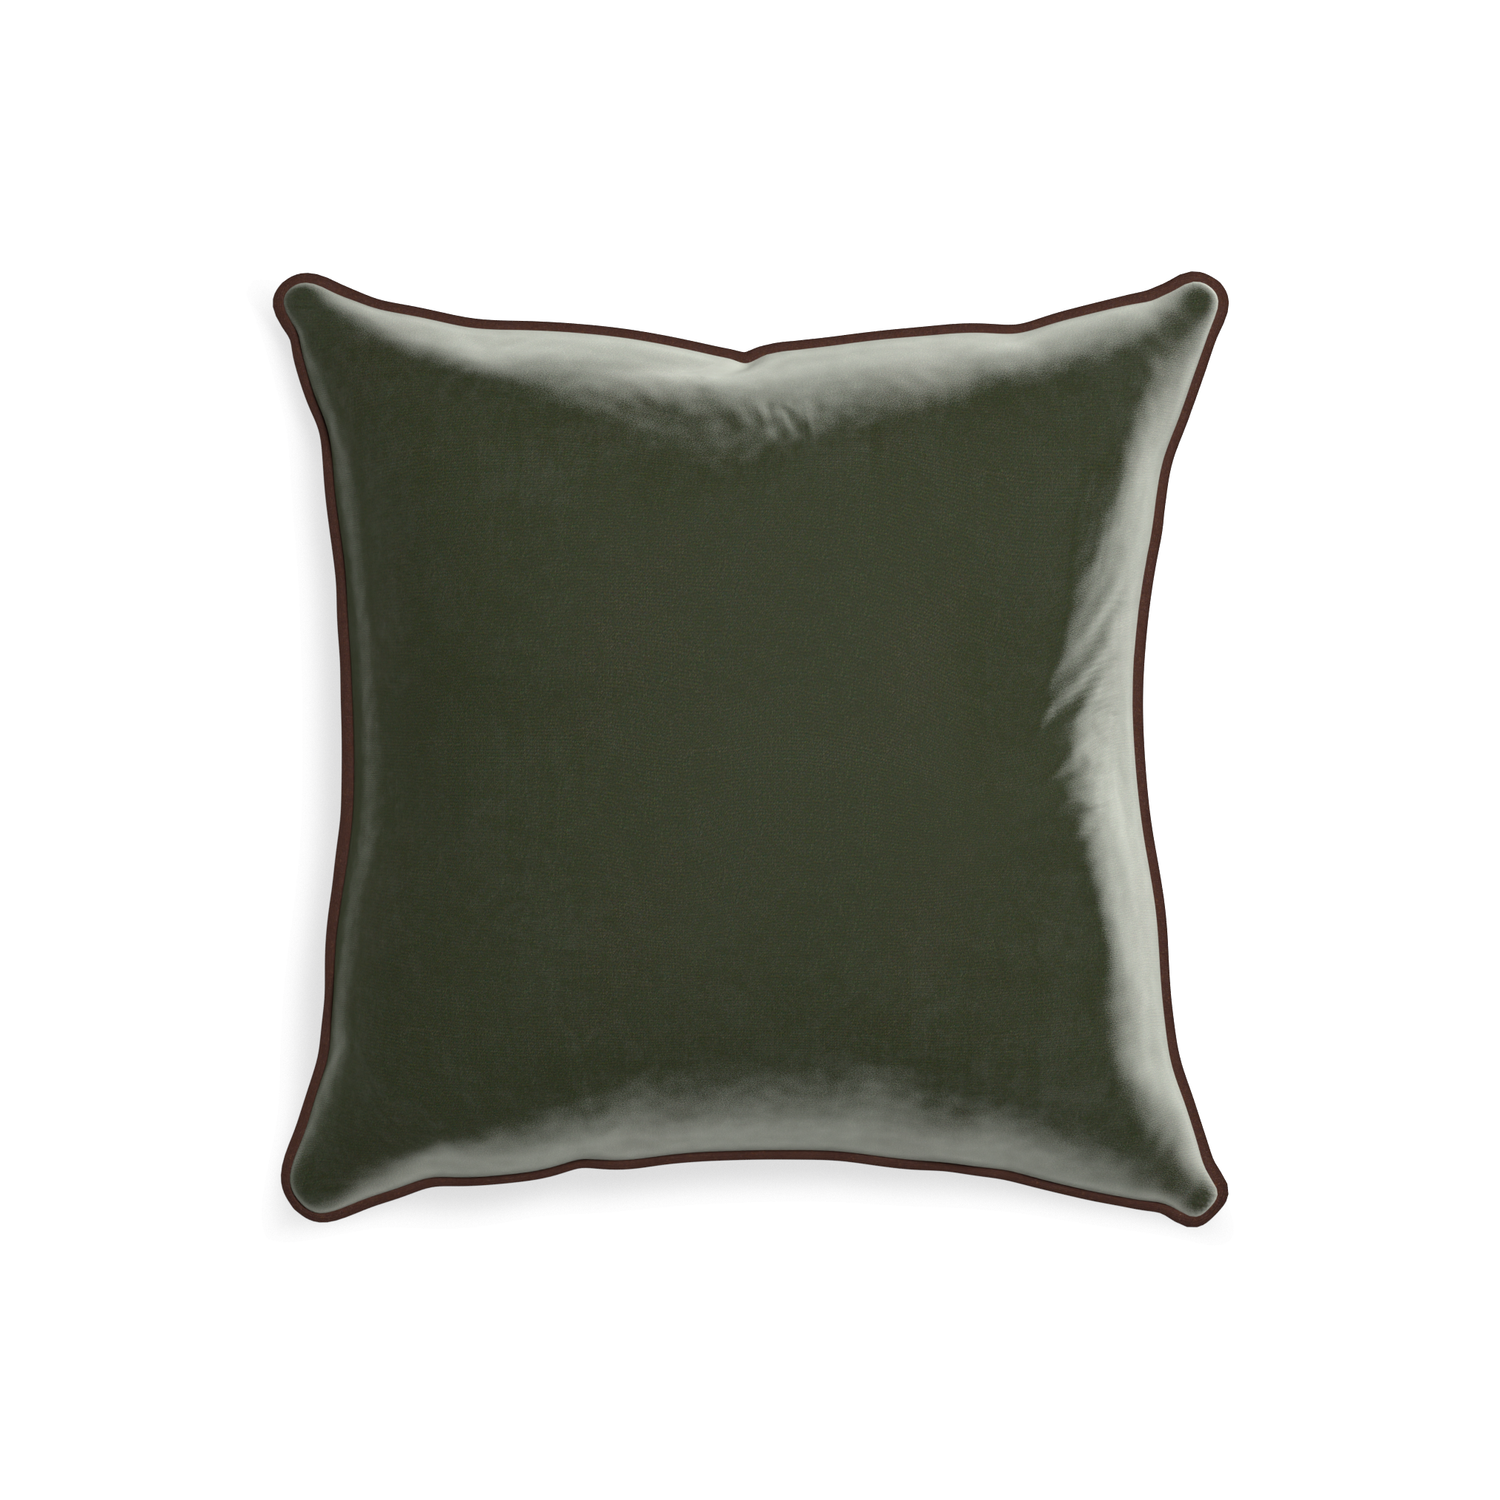 20-square fern velvet custom pillow with w piping on white background